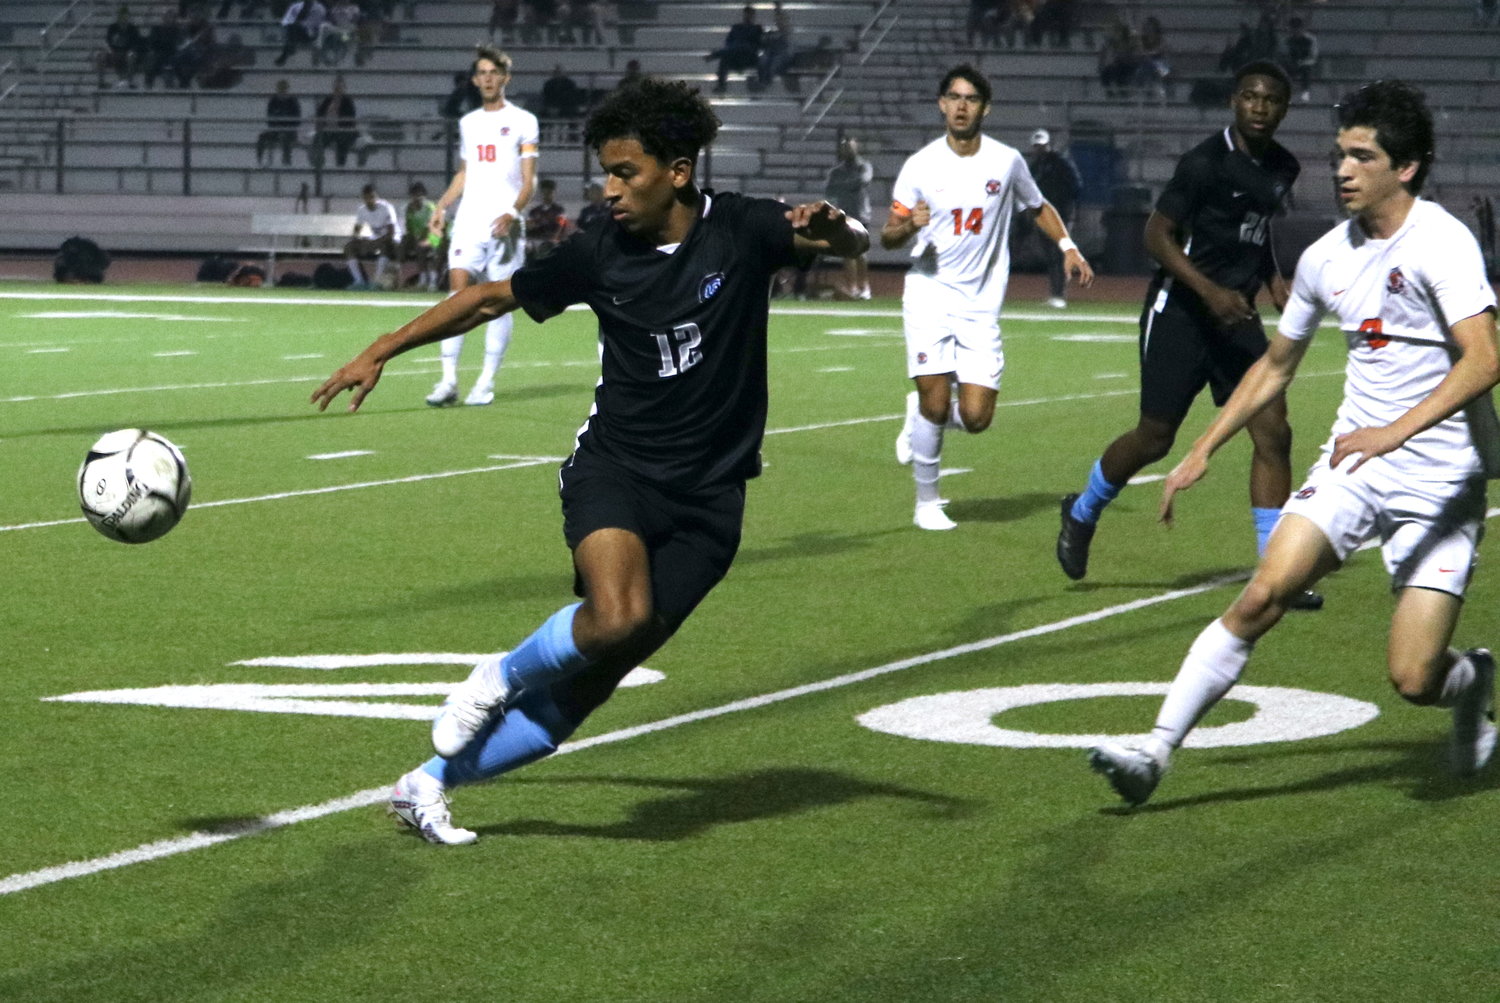 Alex Alexander brings a ball down during Tuesday's District 19-6A game between Seven Lakes and Paetow at the Paetow soccer field.